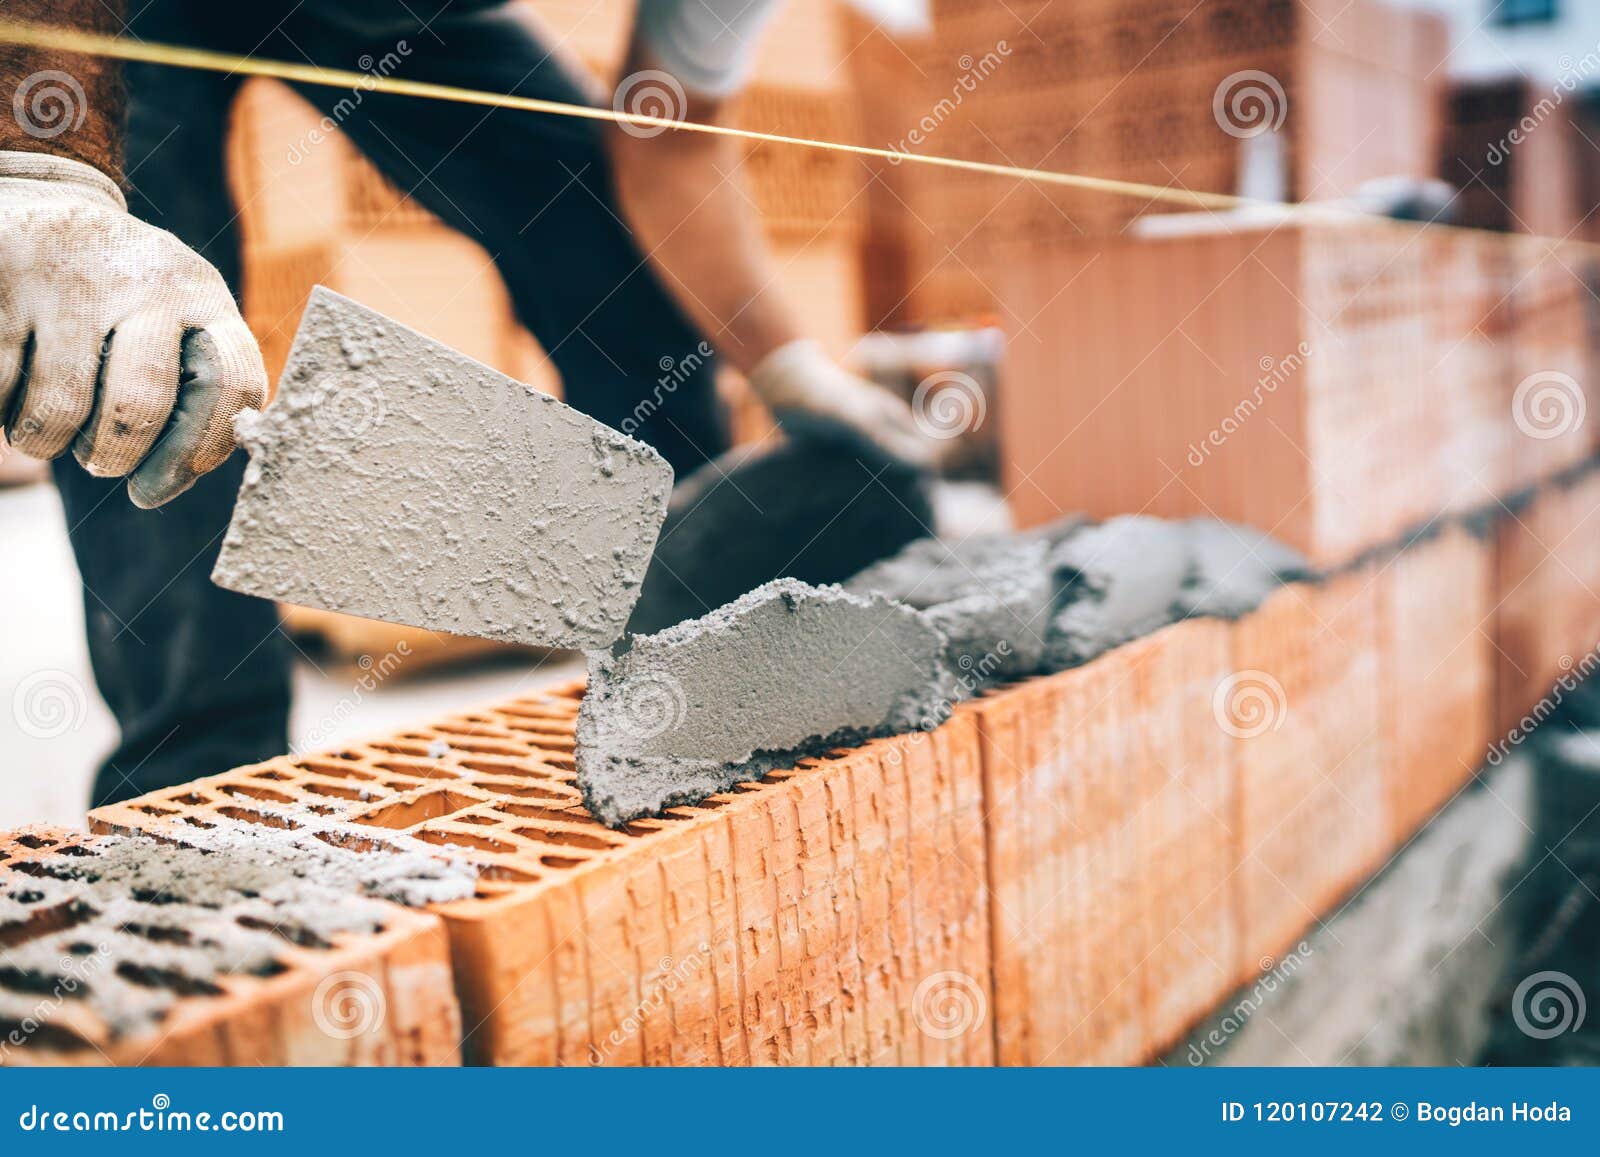 construction worker details, protective gear and trowel with mortar building brick walls